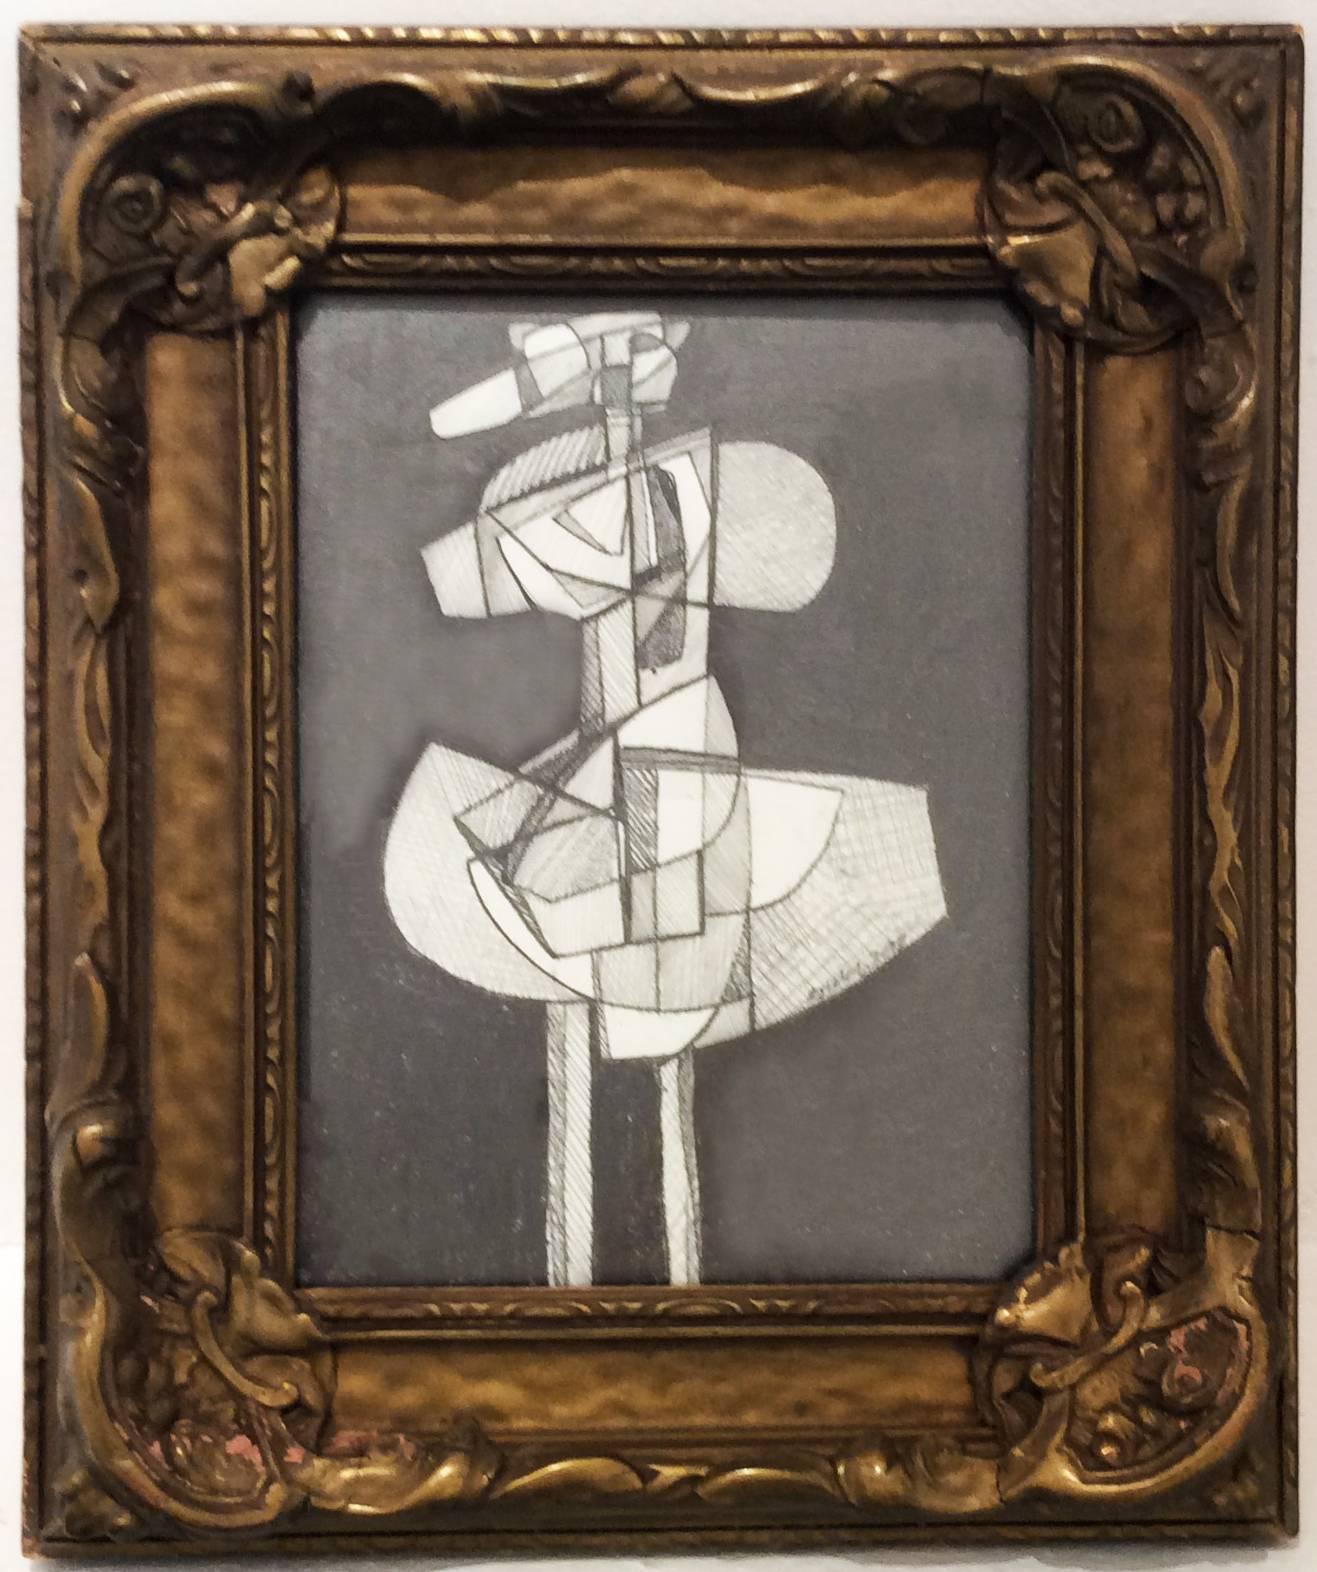 David Dew Bruner Abstract Drawing - Infanta XL (Small Abstract Figurative Graphite Drawing in Antique Gold Frame)